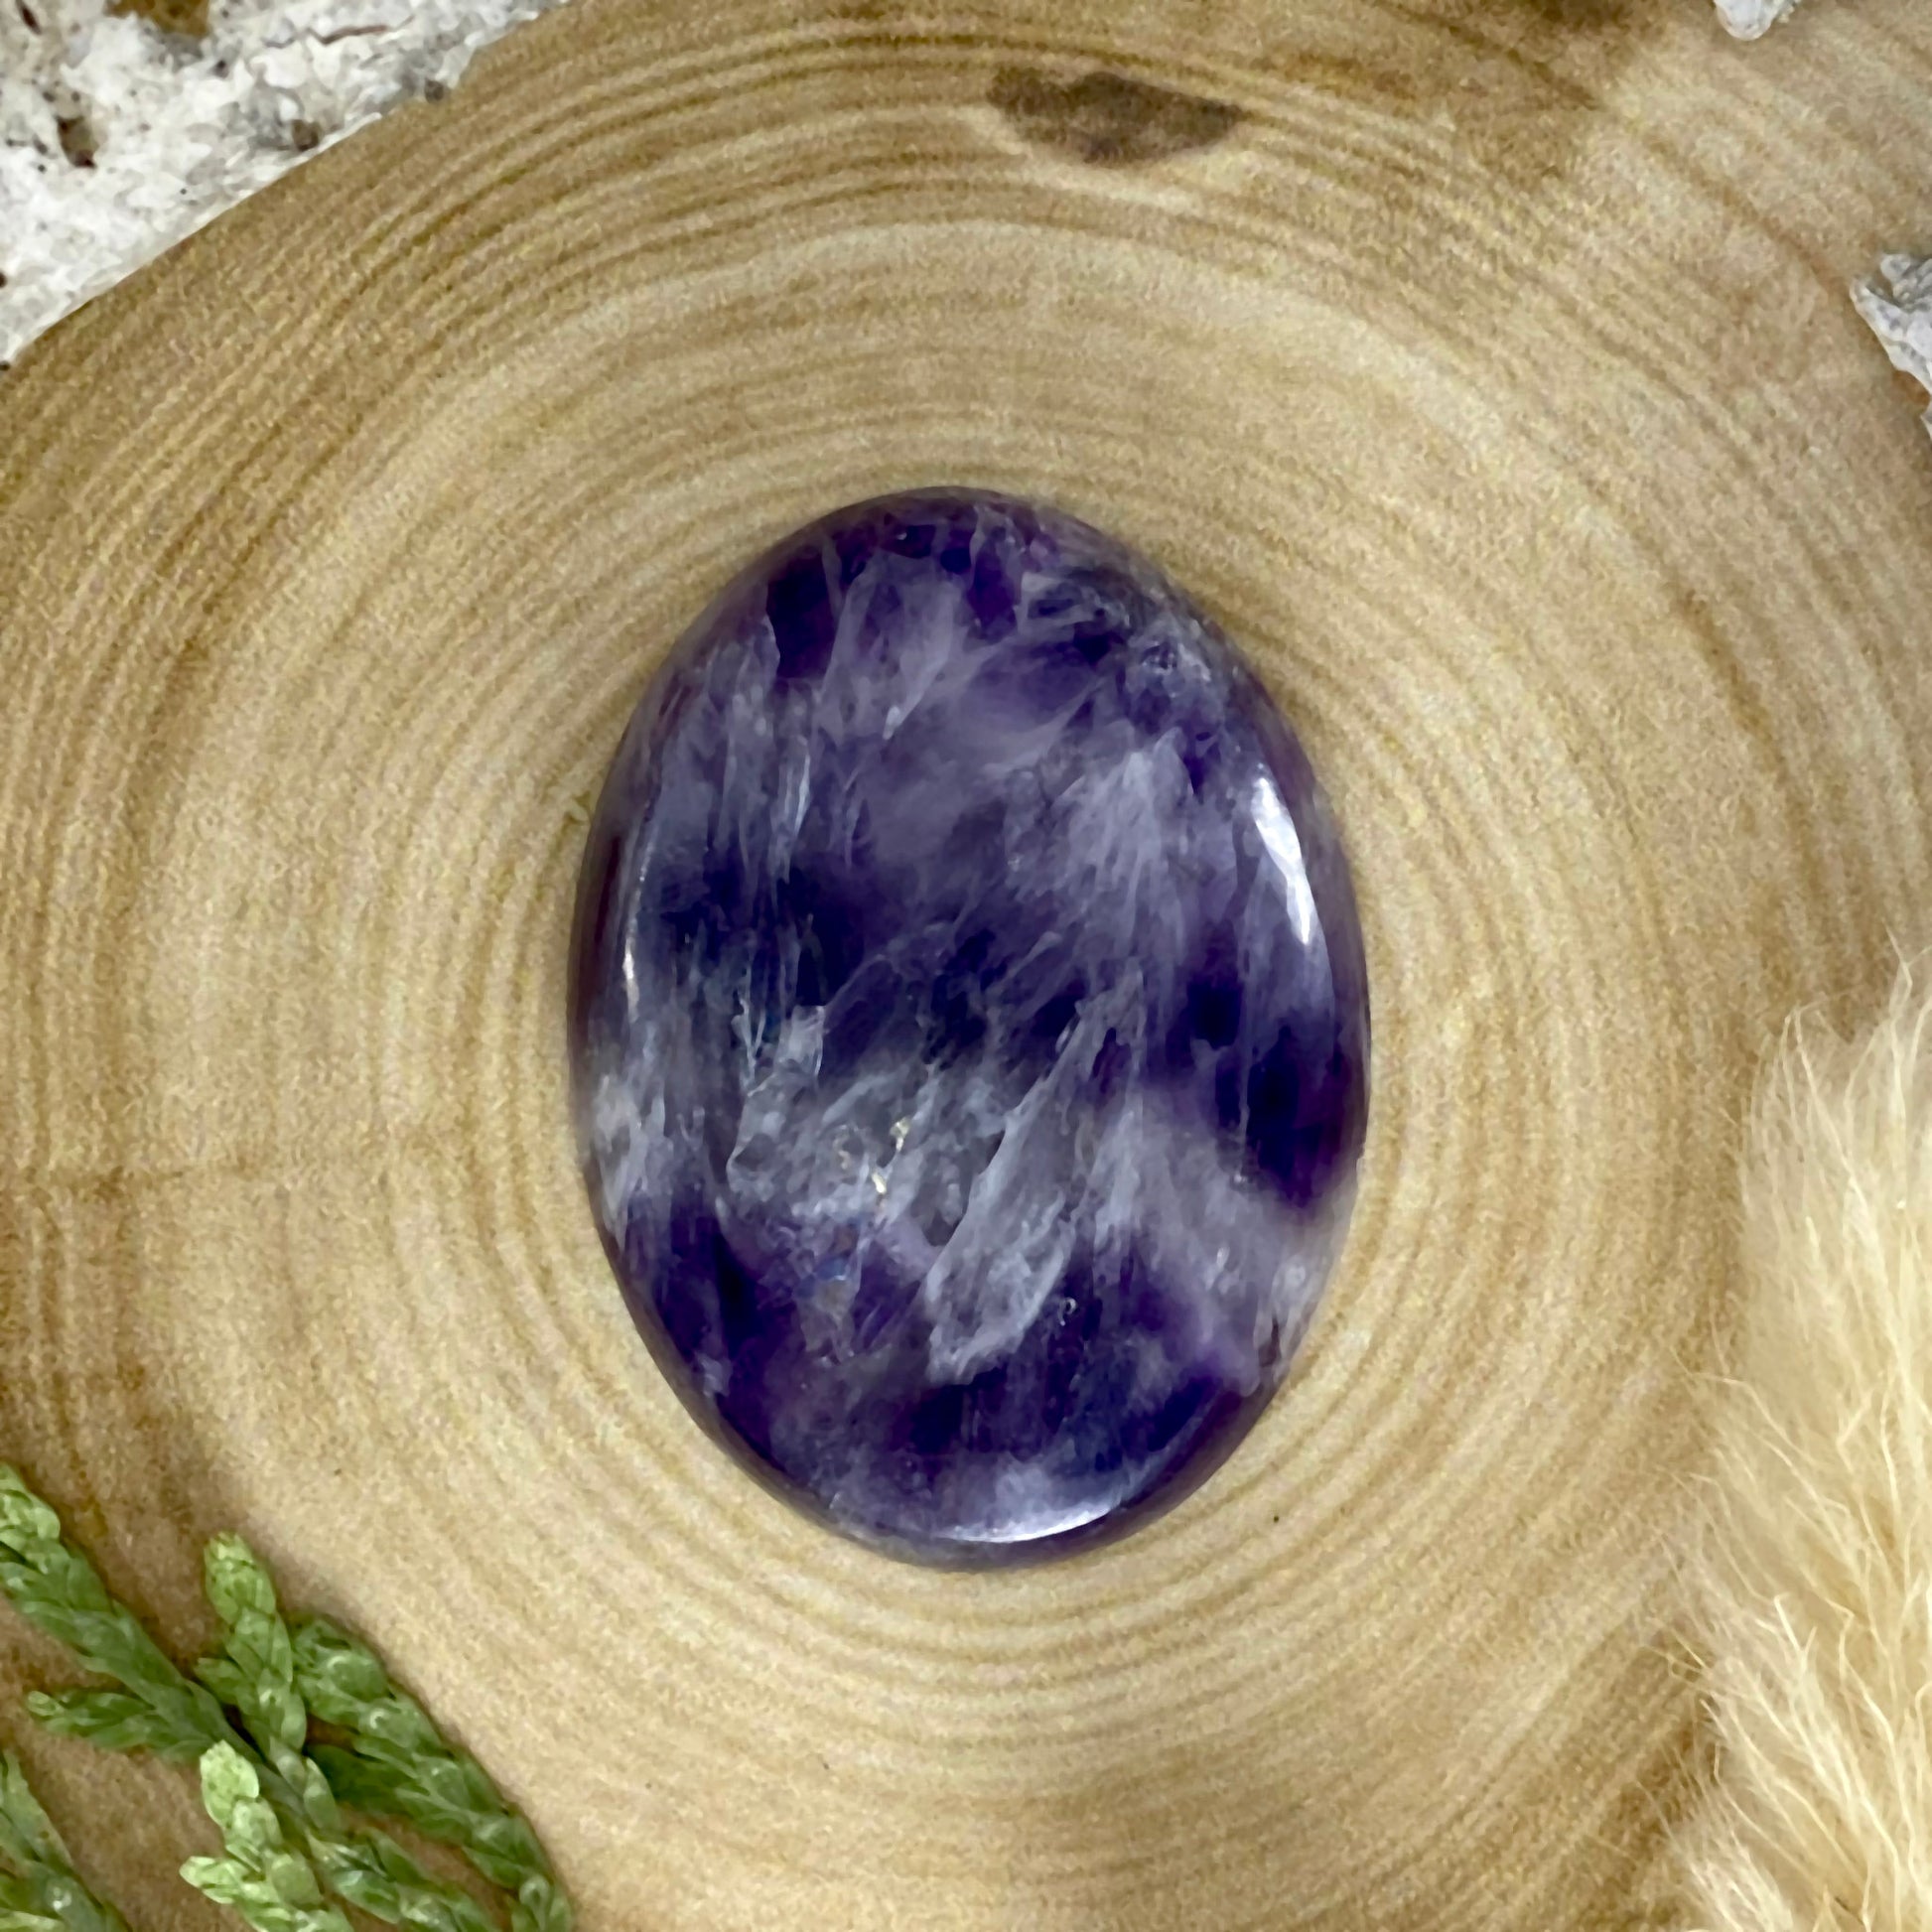 Chevron Amethyst Cabochon Front View - Stone Treasures by the Lake